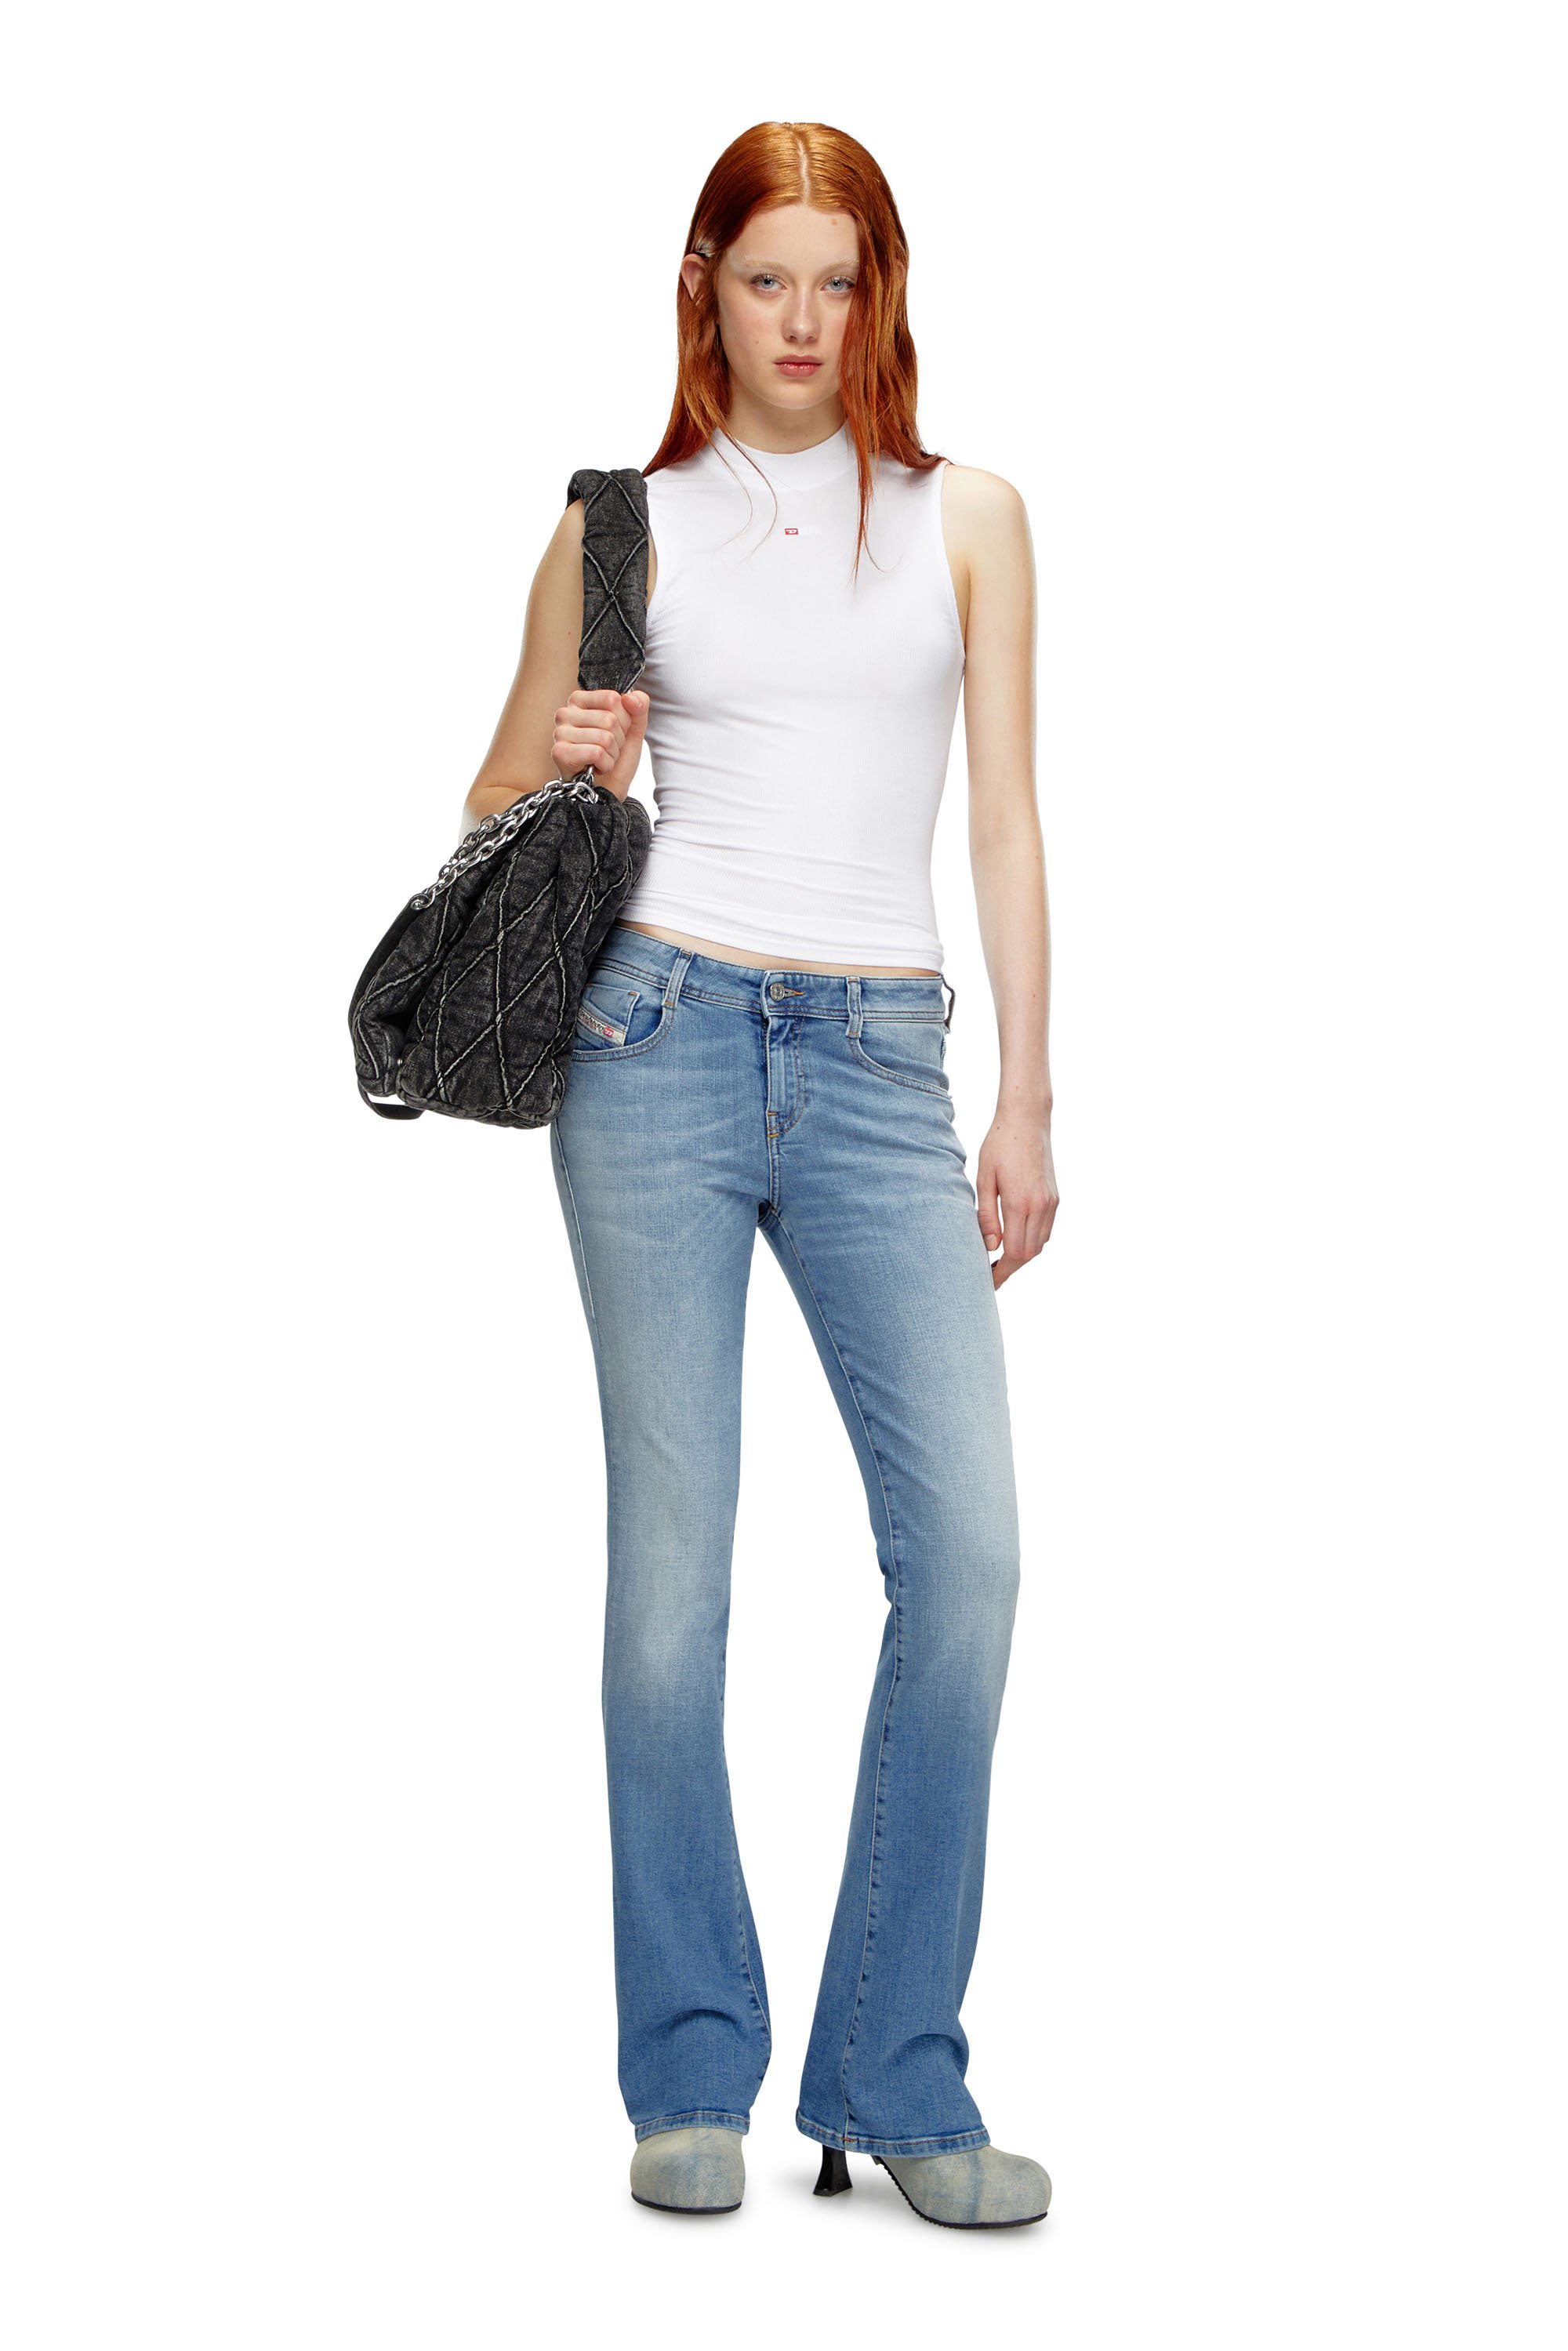 Diesel - Bootcut and Flare Jeans 1969 D-Ebbey 09K06, Mujer Bootcut y Flare Jeans - 1969 D-Ebbey in Azul marino - Image 1